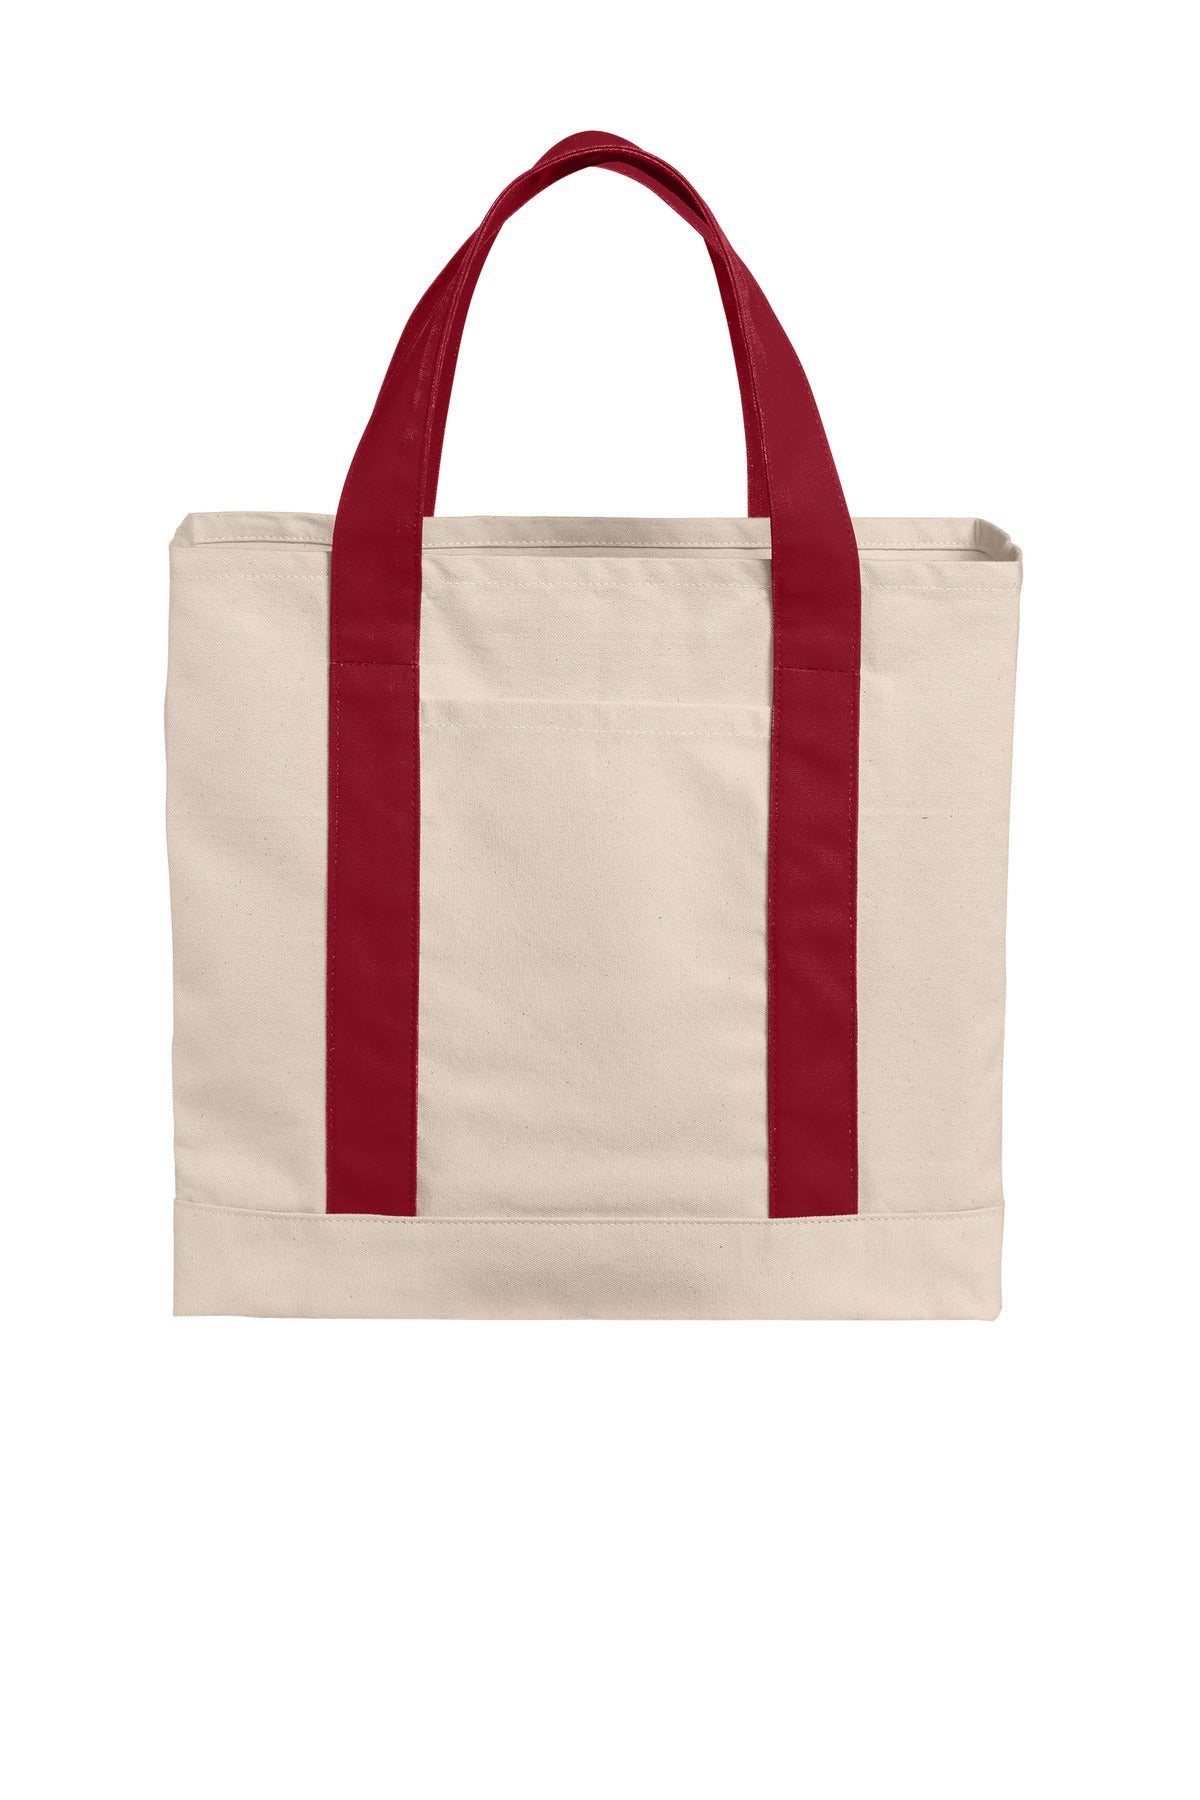 Bags Natural/ Deep Red OSFA Port Authority